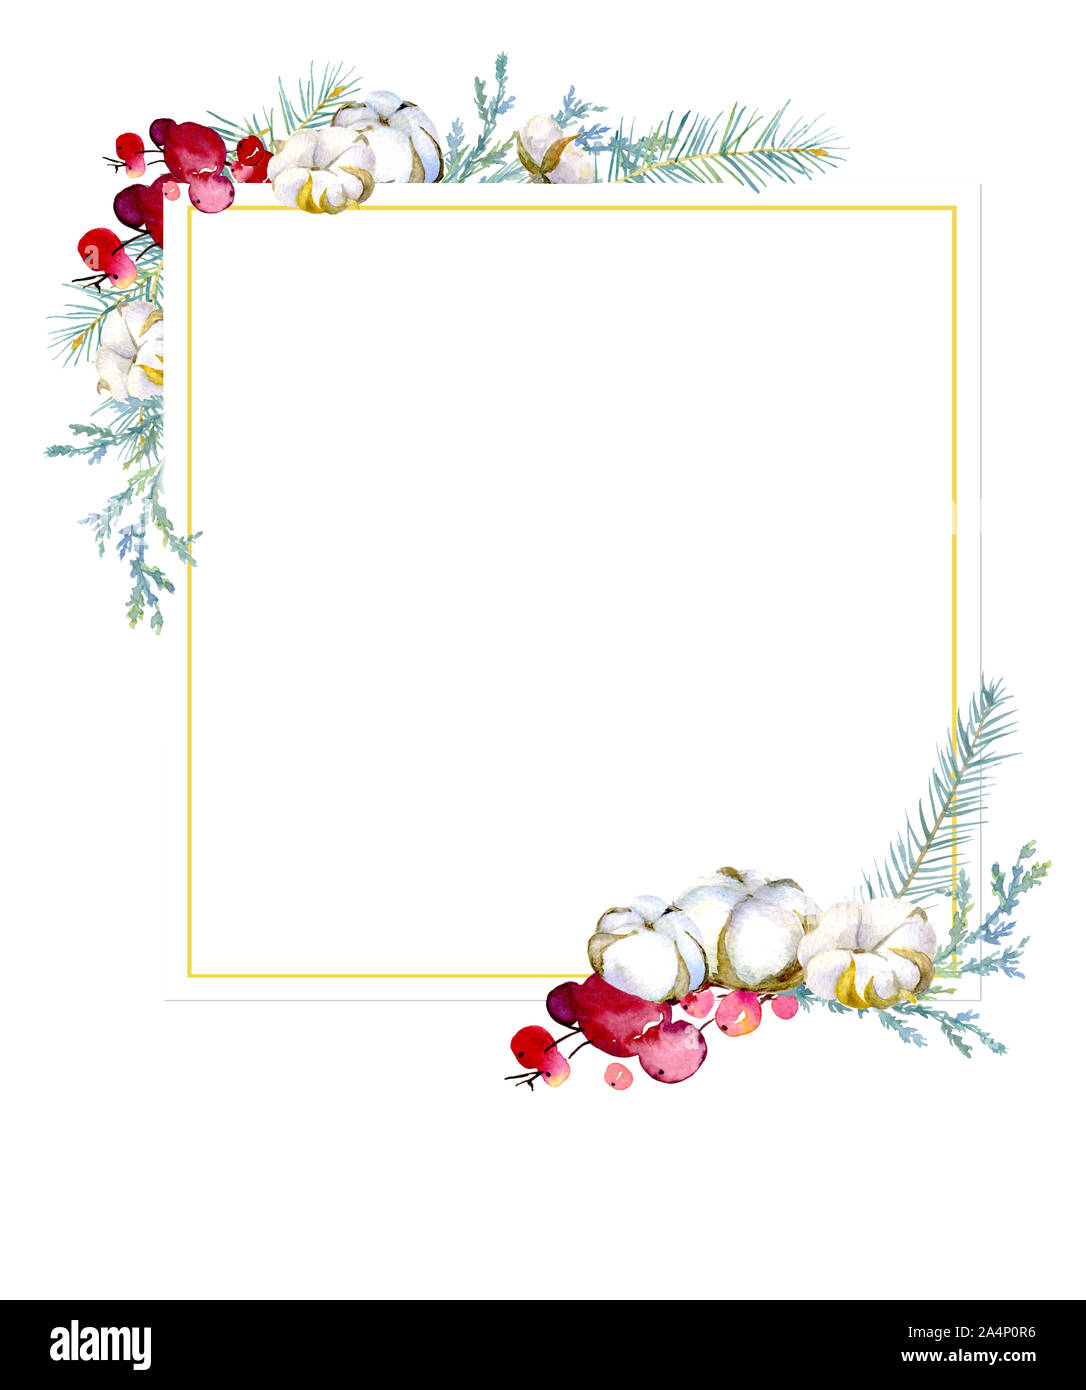 A square frame made up of fir and juniper branches, red berries, cotton bolls. A beautiful background for cards and invitations, gift tags or other de Stock Photo